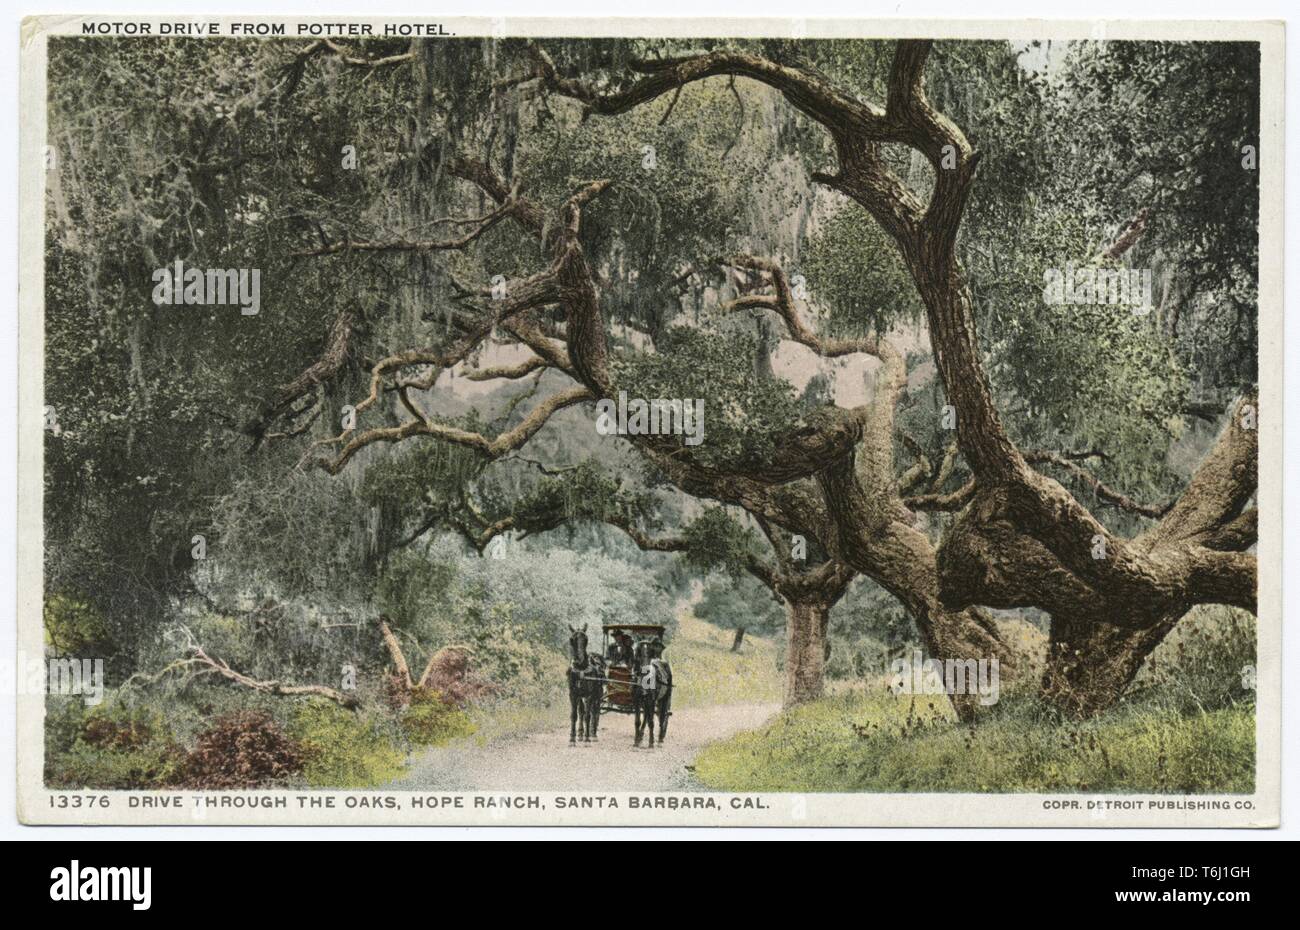 Detroit Publishing Company vintage postcard of a horse-drawn carriage driving through the oaks in Hope Ranch, Santa Barbara, California, 1914. From the New York Public Library. () Stock Photo